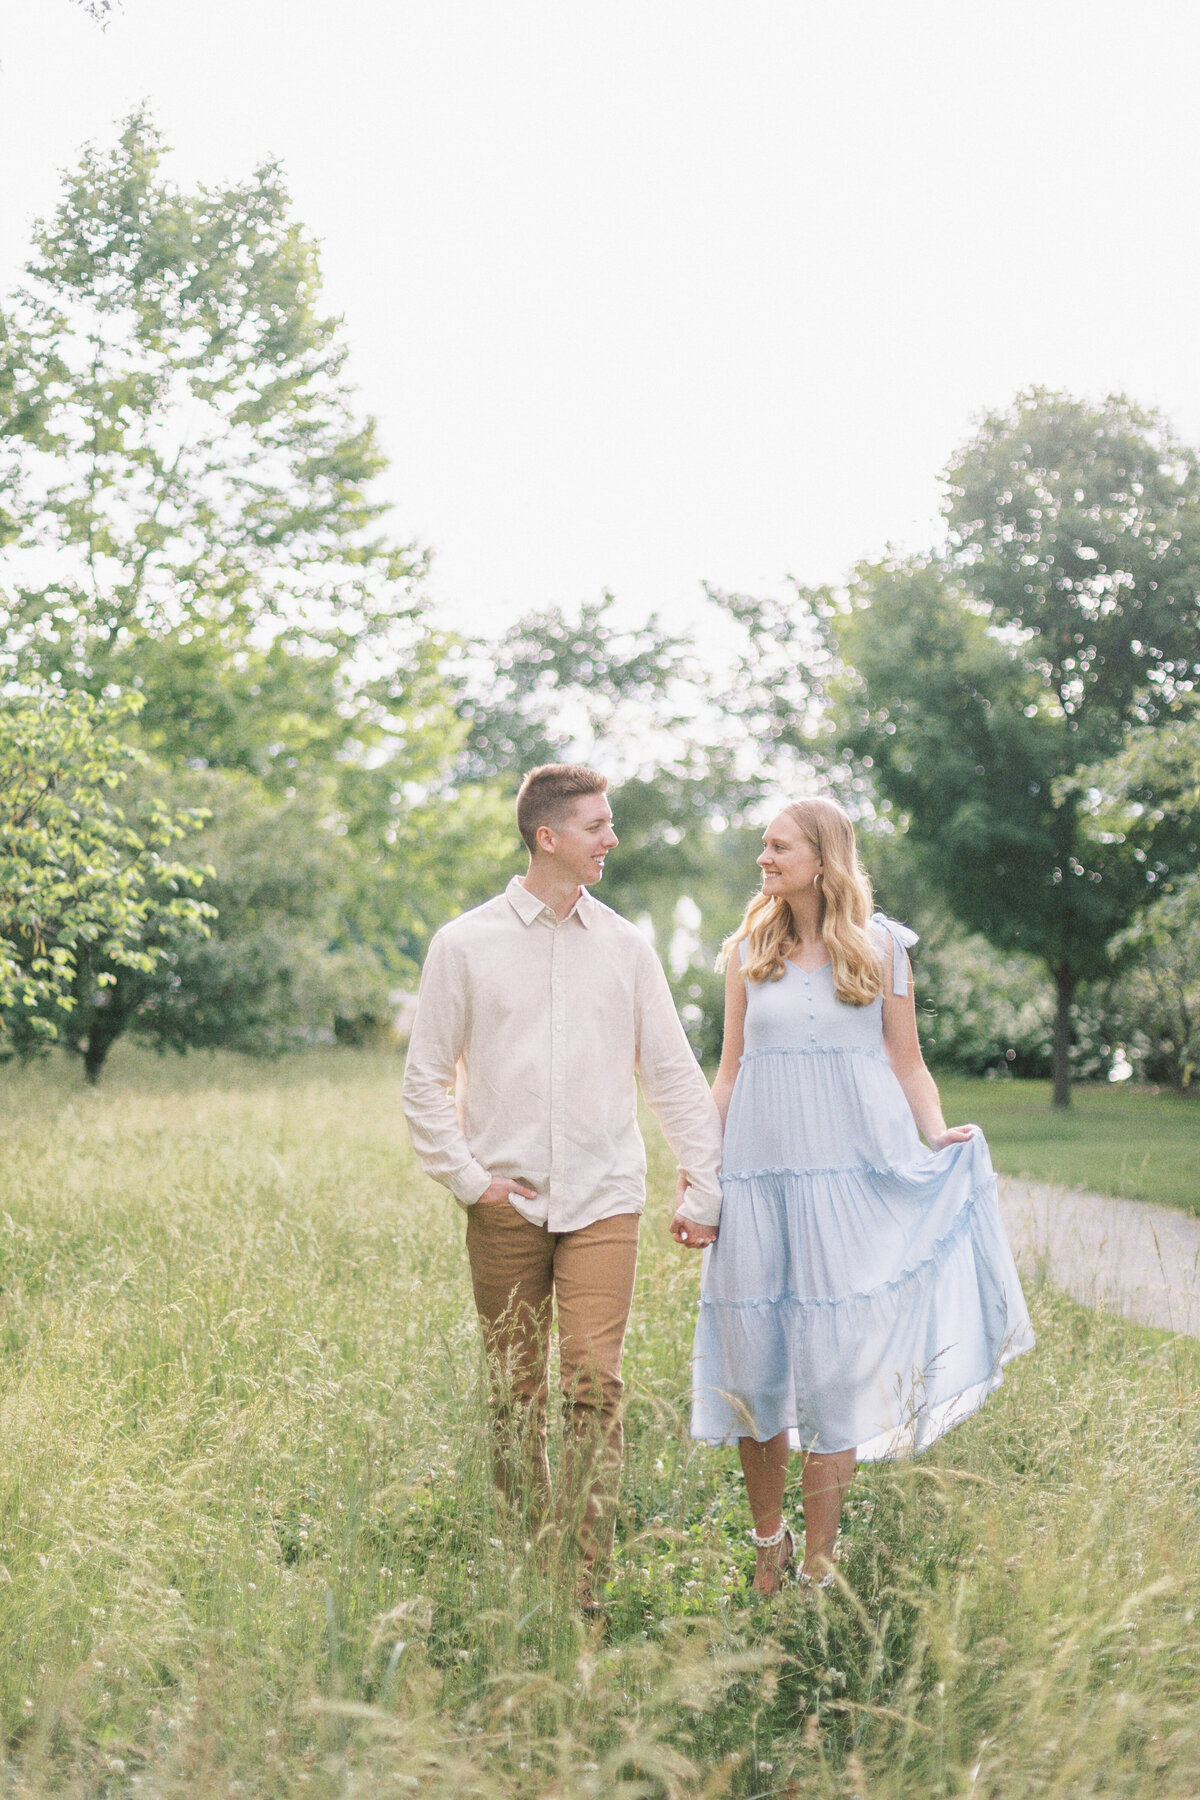 amber-rhea-photography-midwest-wedding-photographer-stl-engagement210A4845